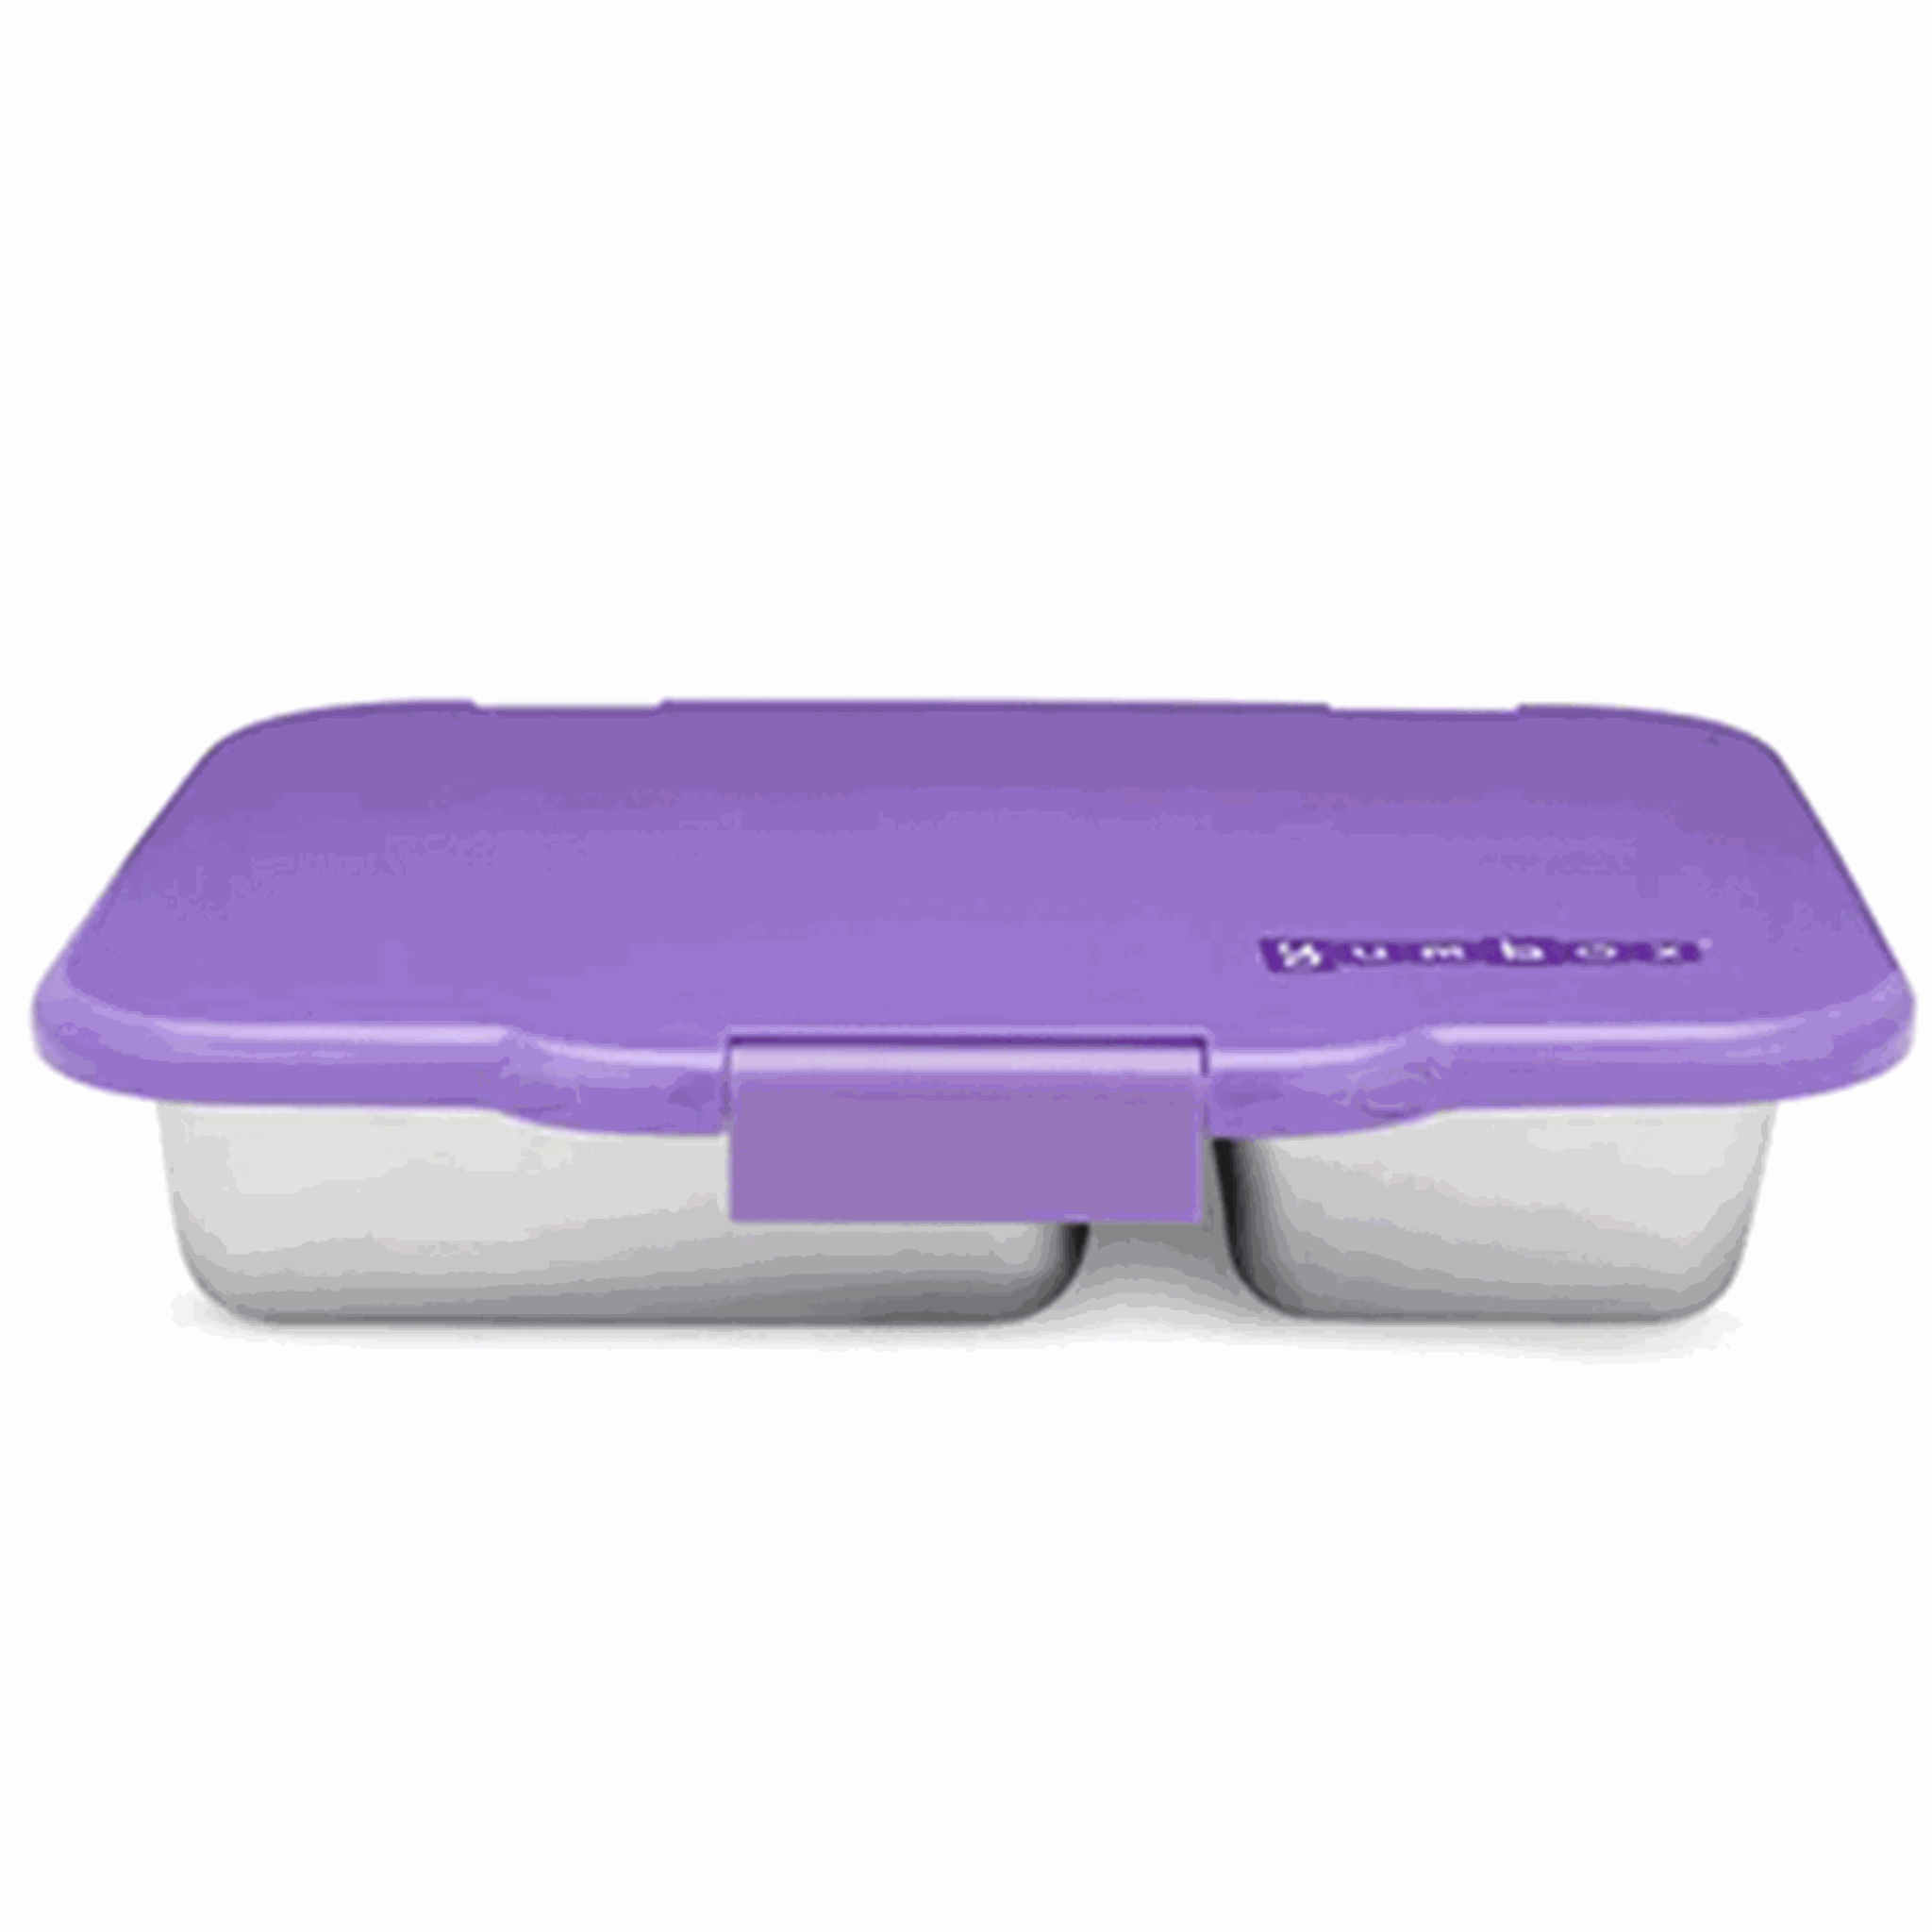 Yumbox Presto Stainless Steel Lunch Box Remy Lavender 4